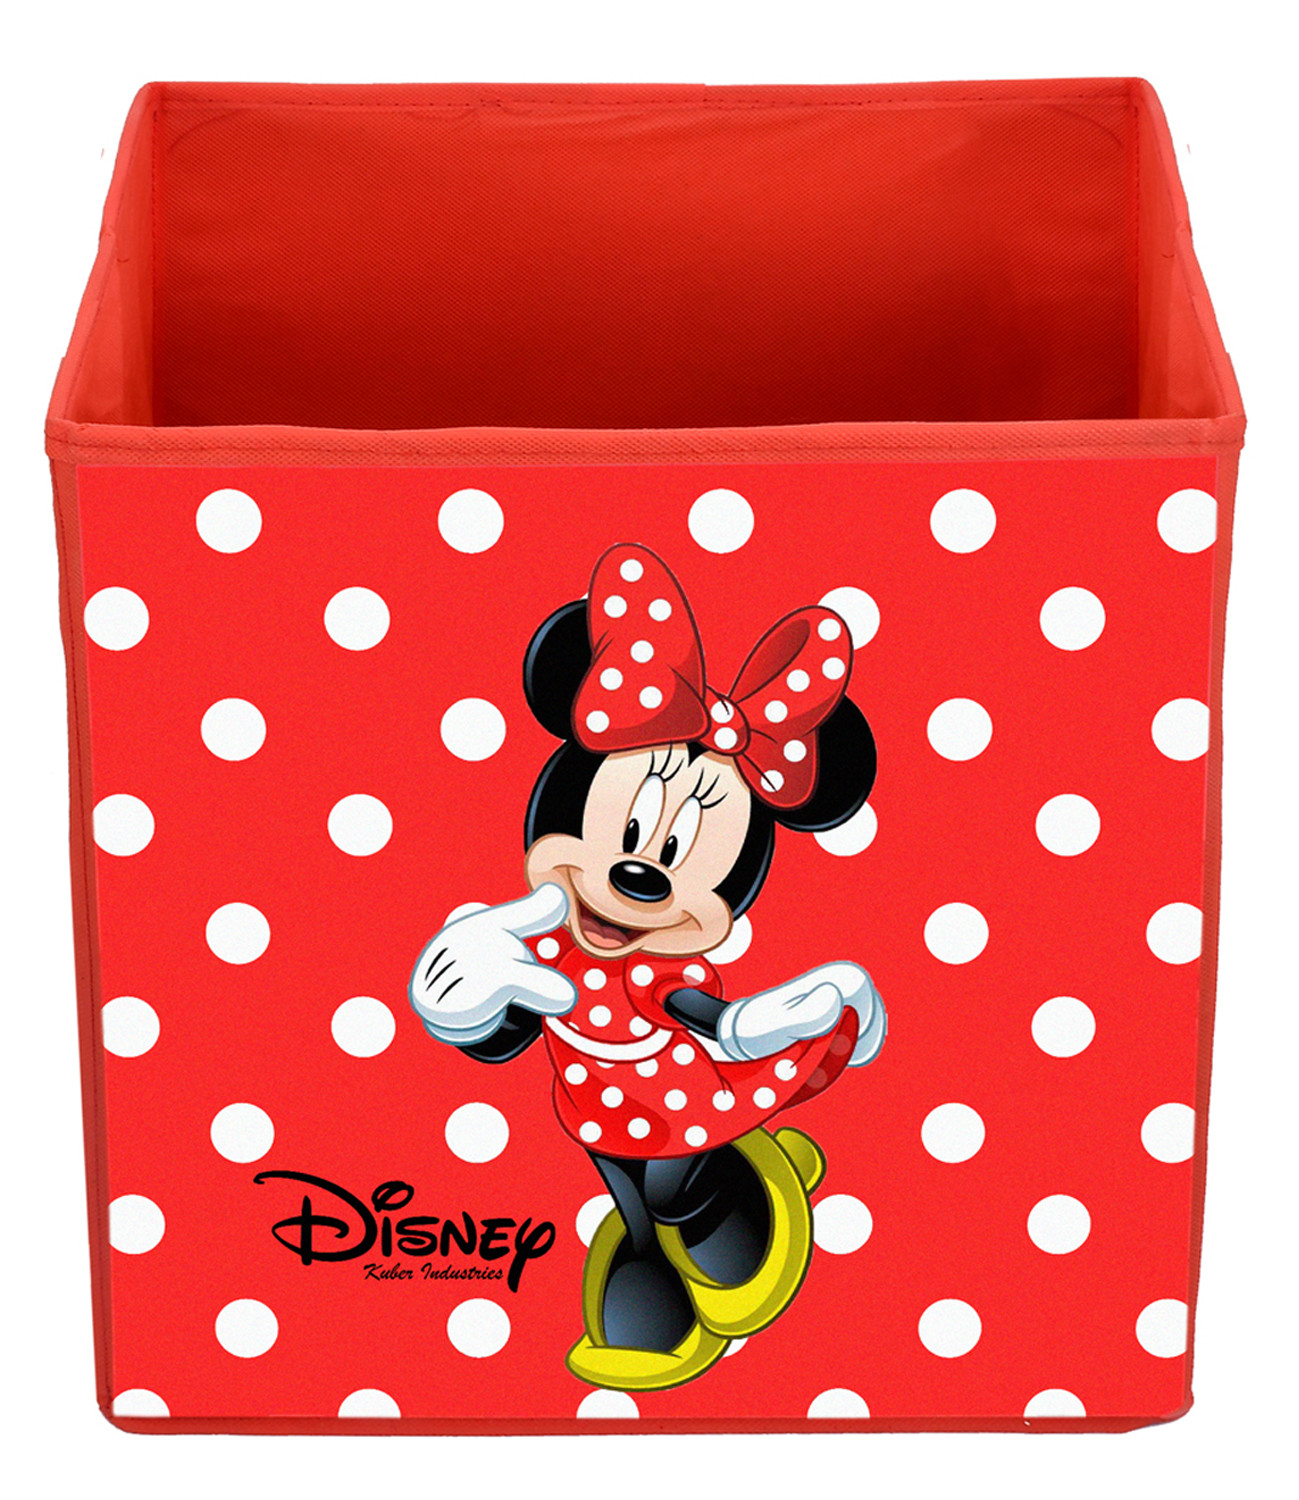 Kuber Industries Disney Print Non Woven Fabric Foldable Large Size Storage Cube Toy,Books,Shoes Storage Box With Handle (Black,Red & Brown)